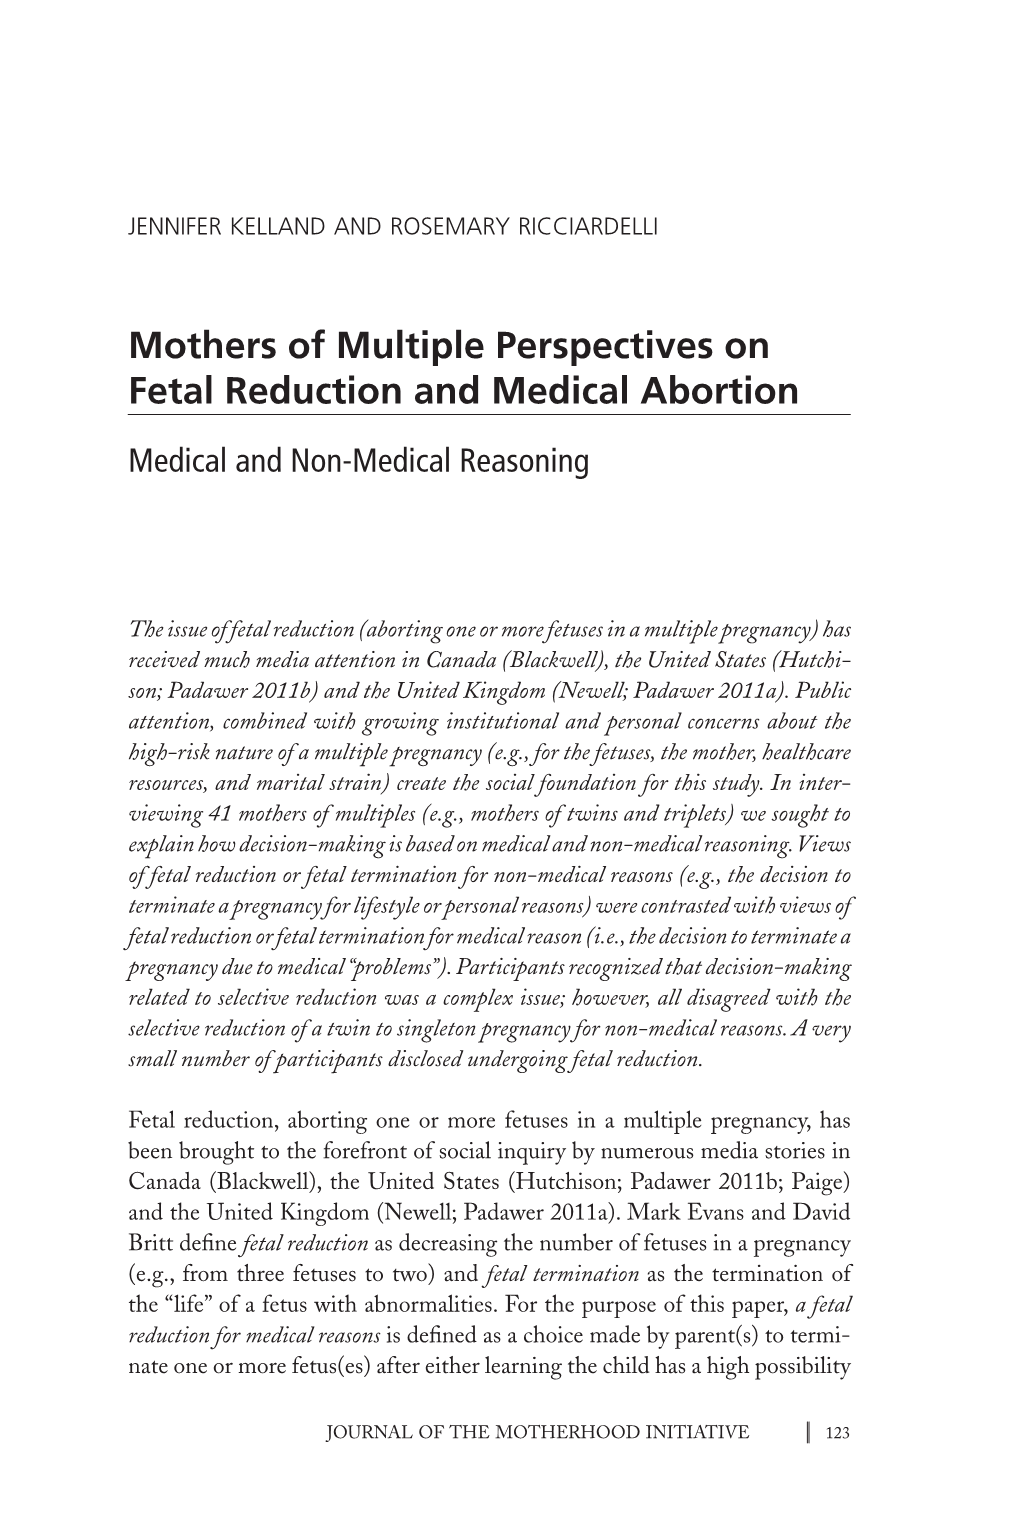 Mothers of Multiple Perspectives on Fetal Reduction and Medical Abortion